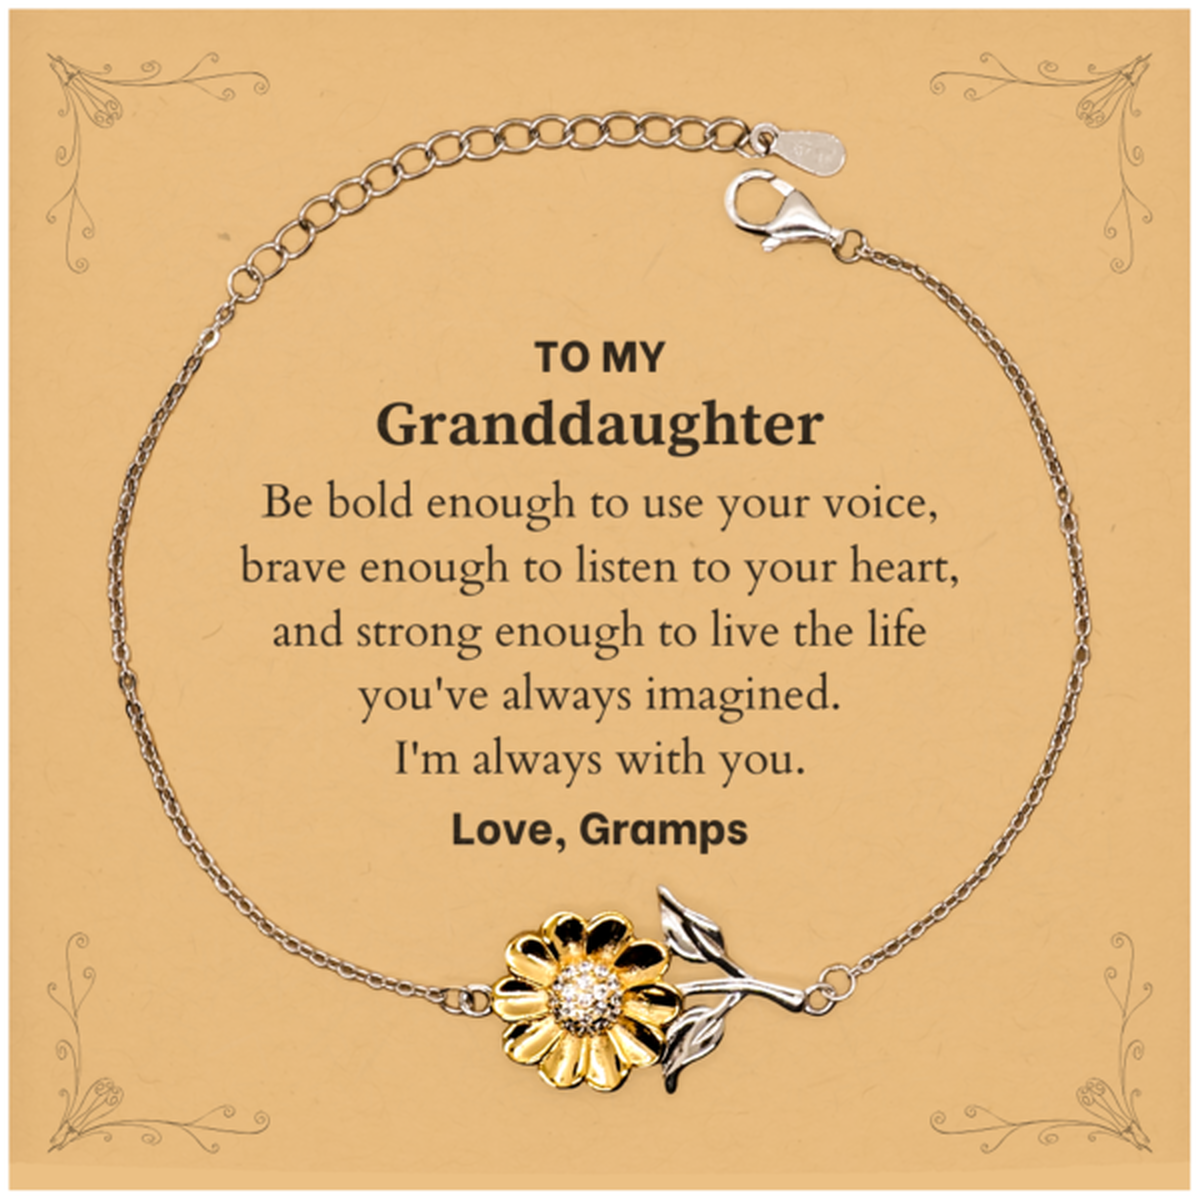 Keepsake Granddaughter Sunflower Bracelet Gift Idea Graduation Christmas Birthday Granddaughter from Gramps, Granddaughter Be bold enough to use your voice, brave enough to listen to your heart. Love, Gramps